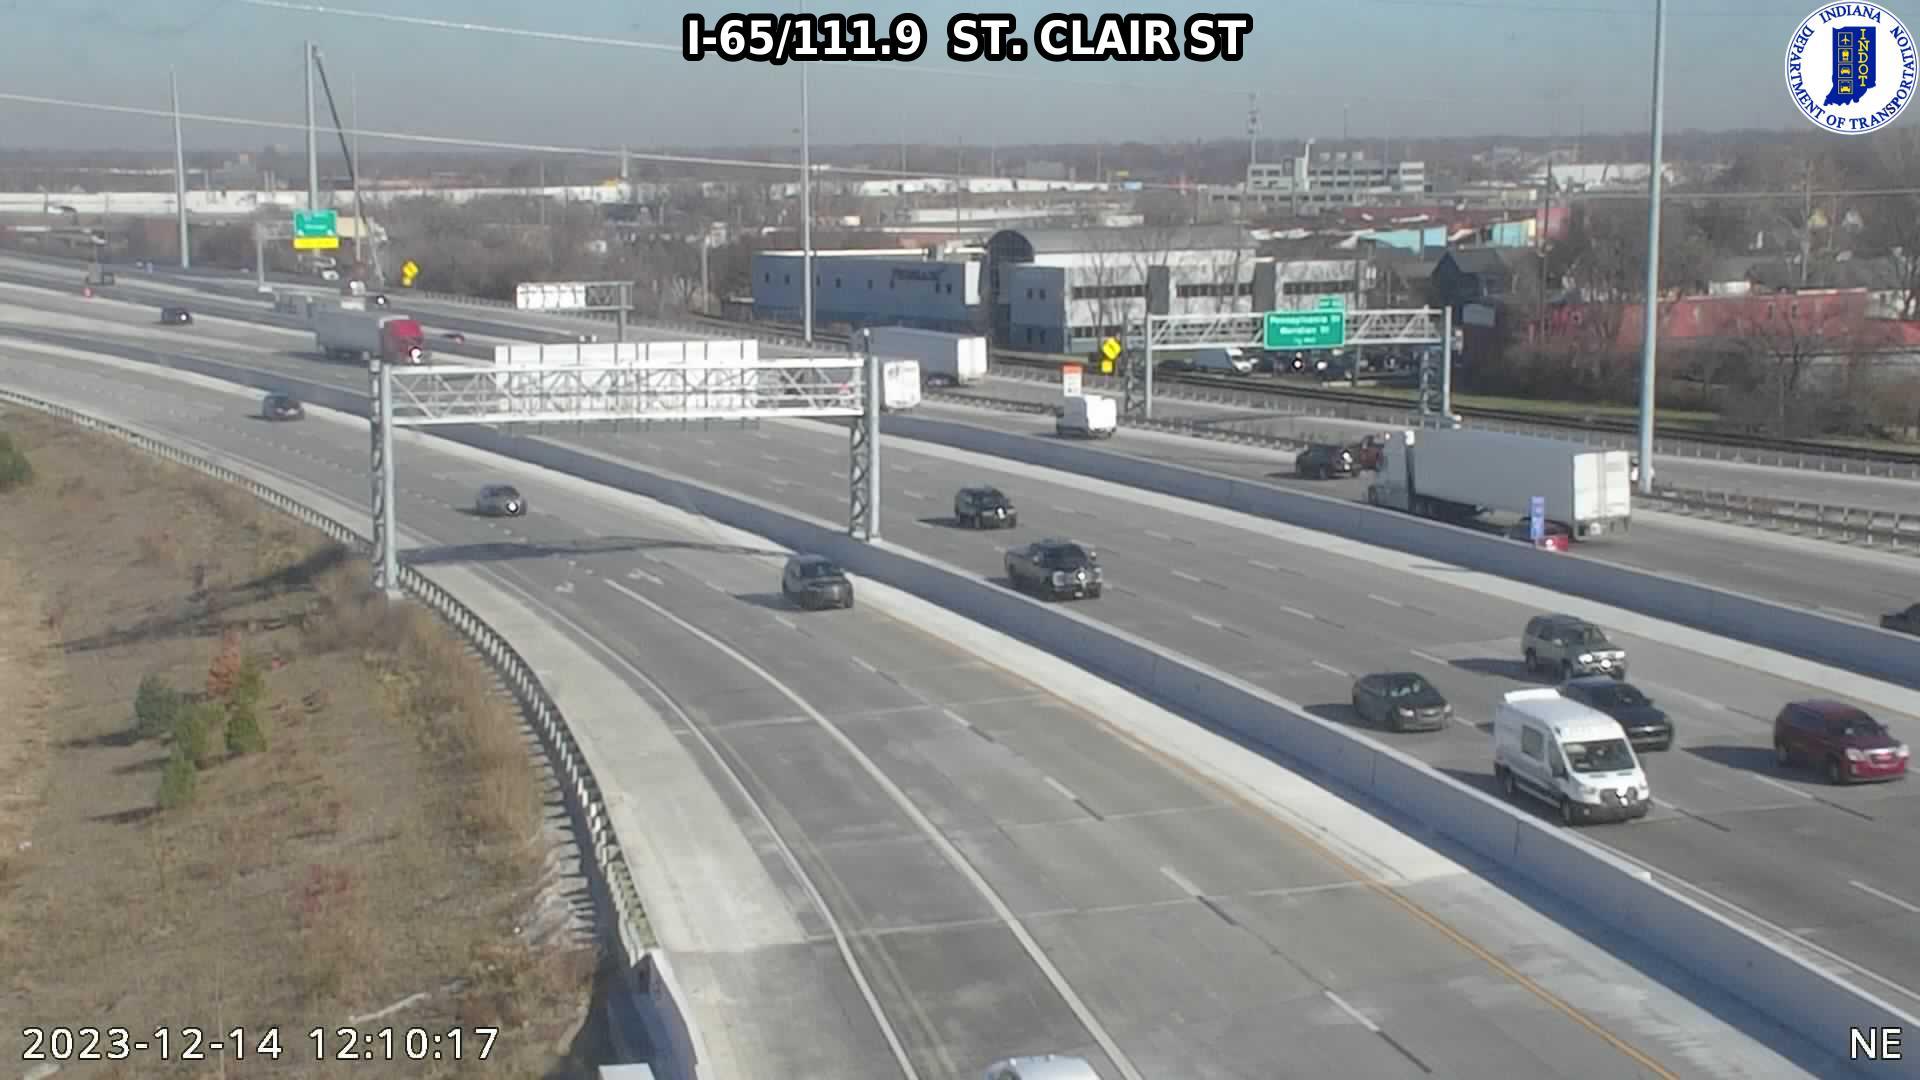 Traffic Cam Cottage Home: I-65: I-65/111.9 ST. CLAIR ST: I-65/111.9 ST. CLAIR ST Player